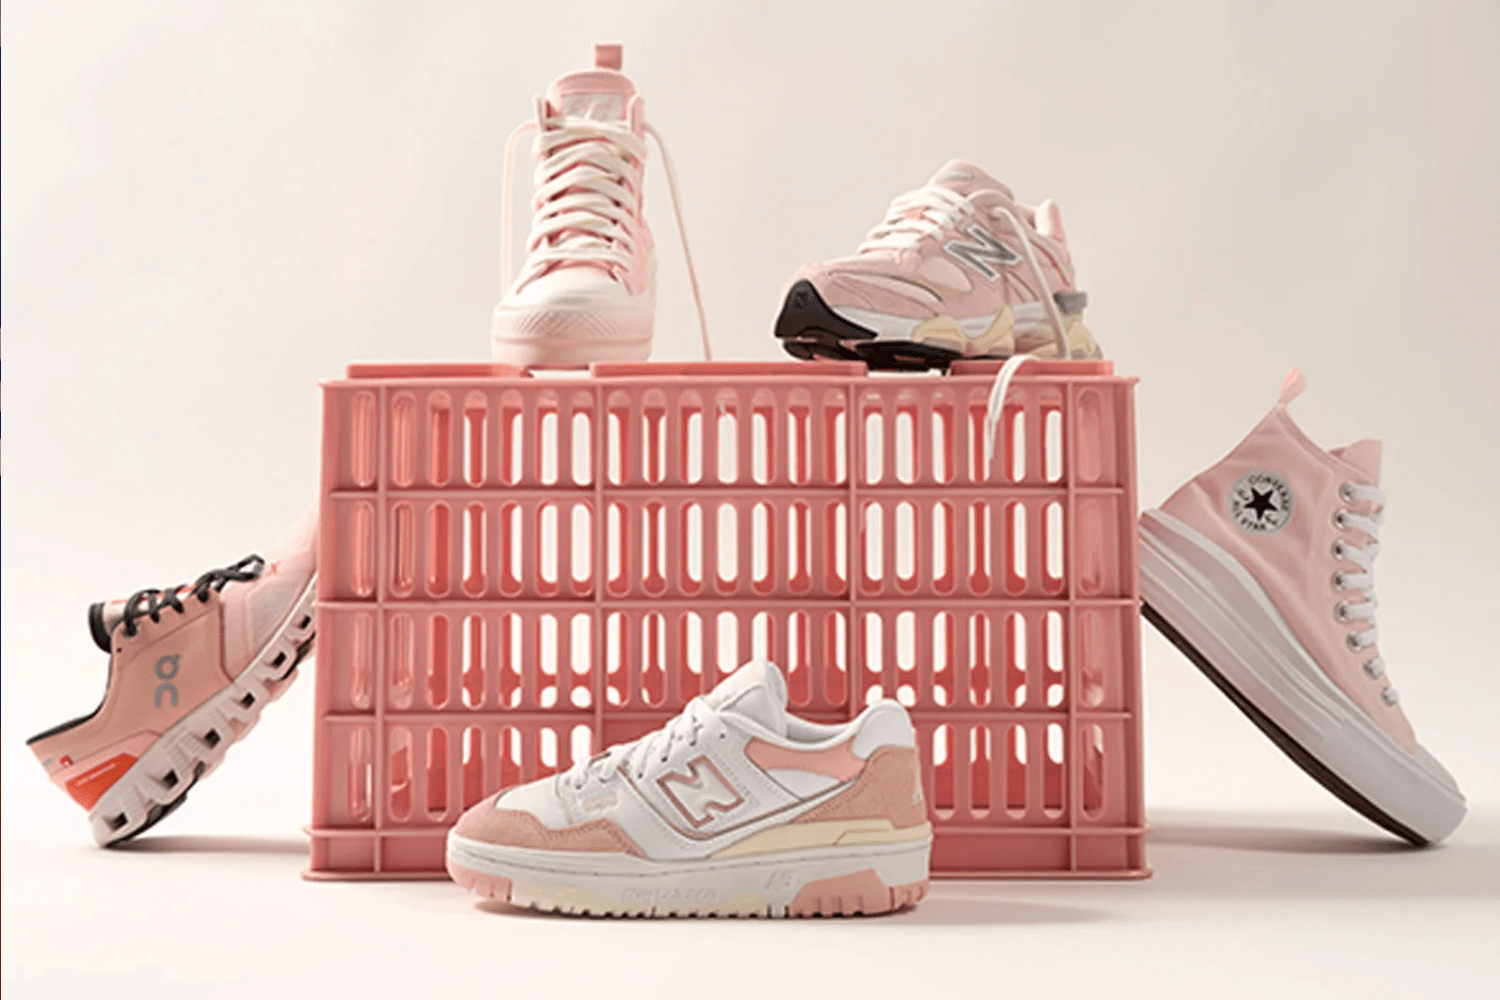 These pink styles from Foot Locker are a must-have for summer